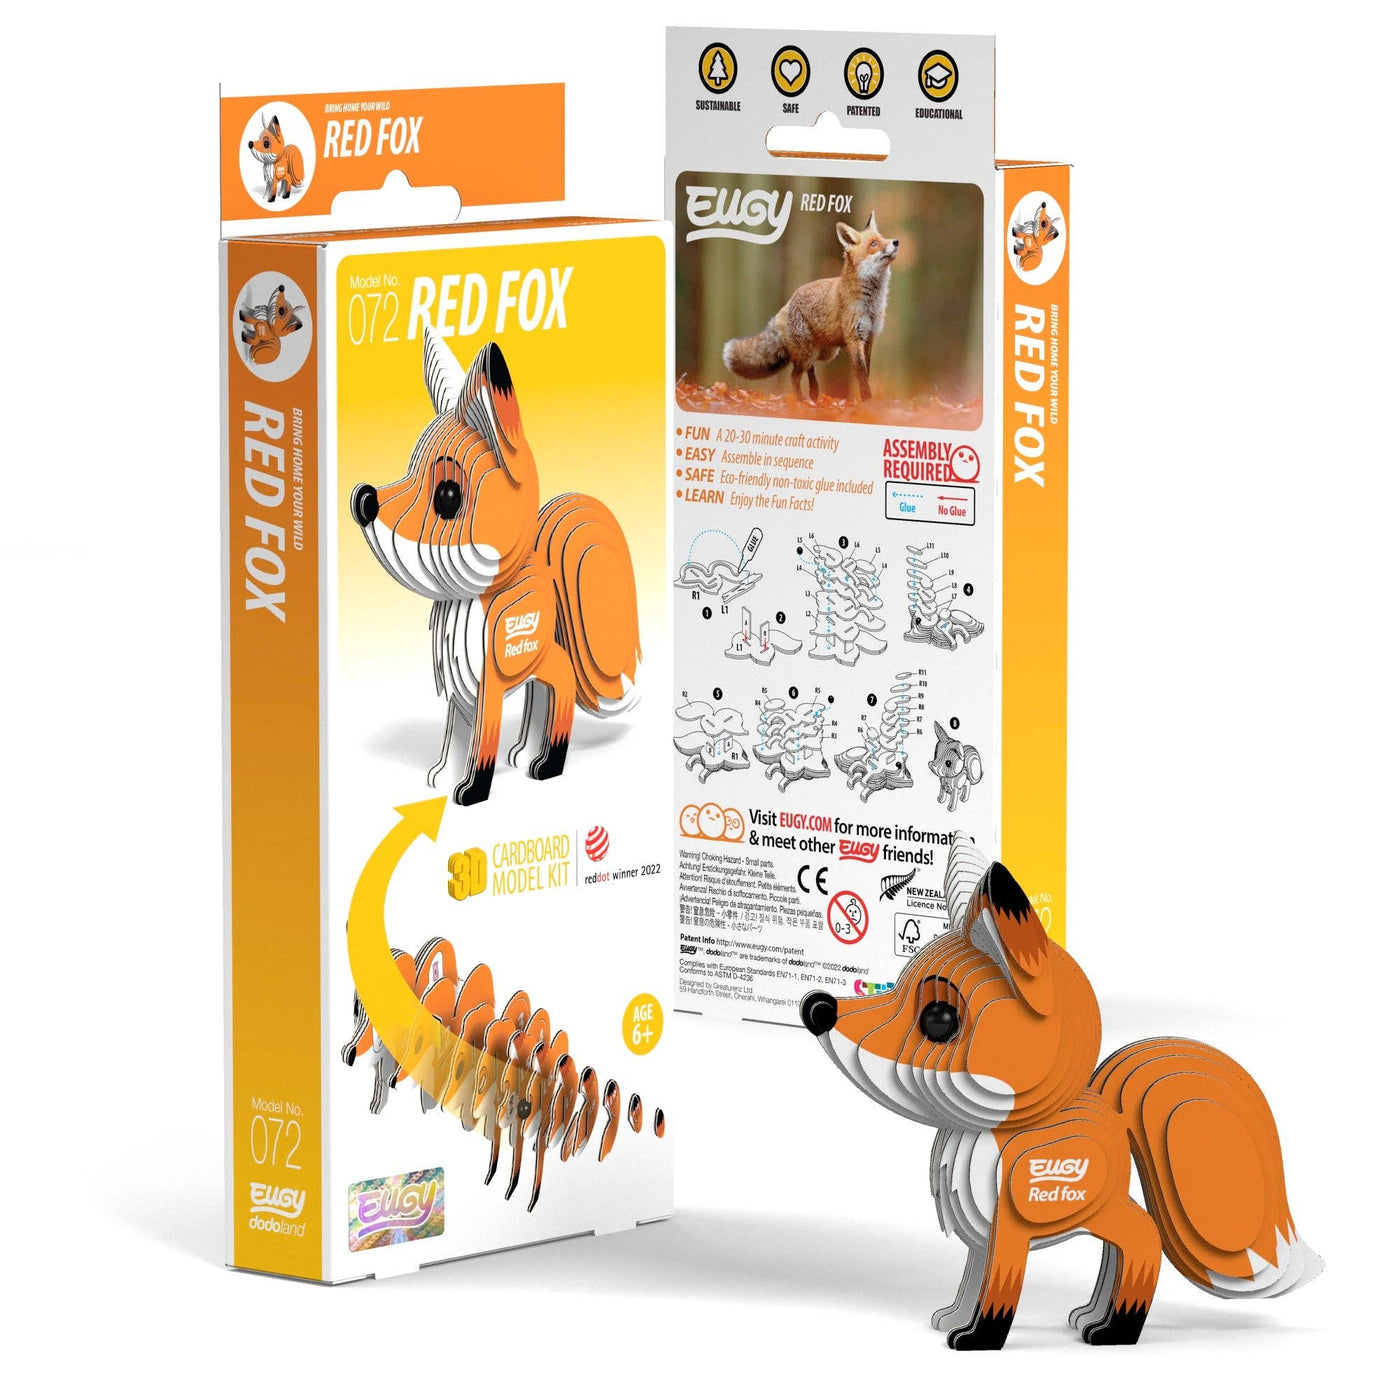 Red Fox EUGY - 3D Puzzle